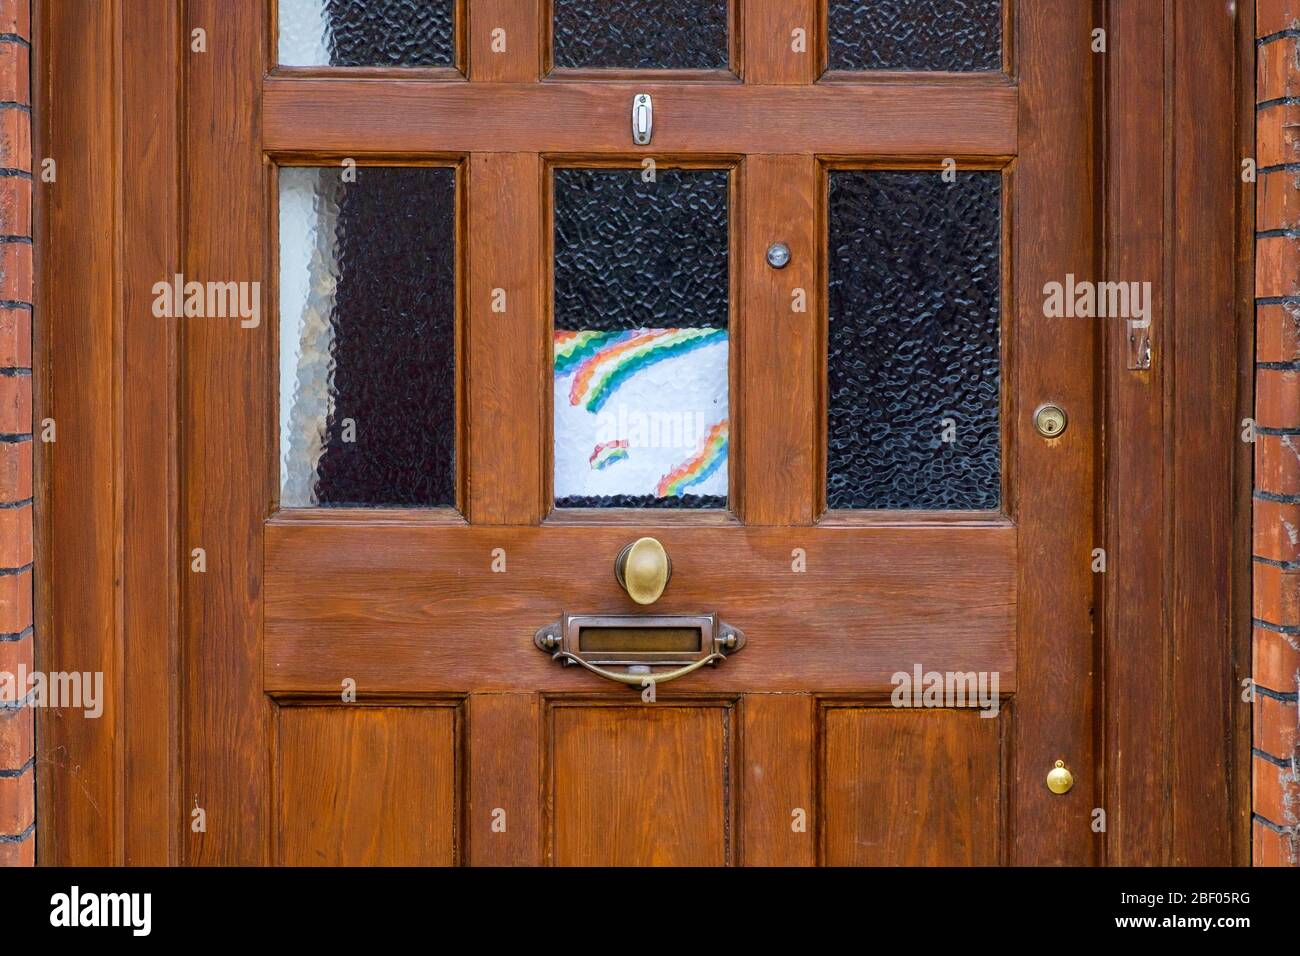 Chippenham, Wiltshire UK, 16th April, 2020. With the nation due to once again clap to show their support for the NHS tonight, a childs drawing of a rainbow (a symbol of support for people wanting to show solidarity with NHS workers) is pictured on a front door of a home in Chippenham, Wiltshire. Credit: Lynchpics/Alamy Live News Stock Photo